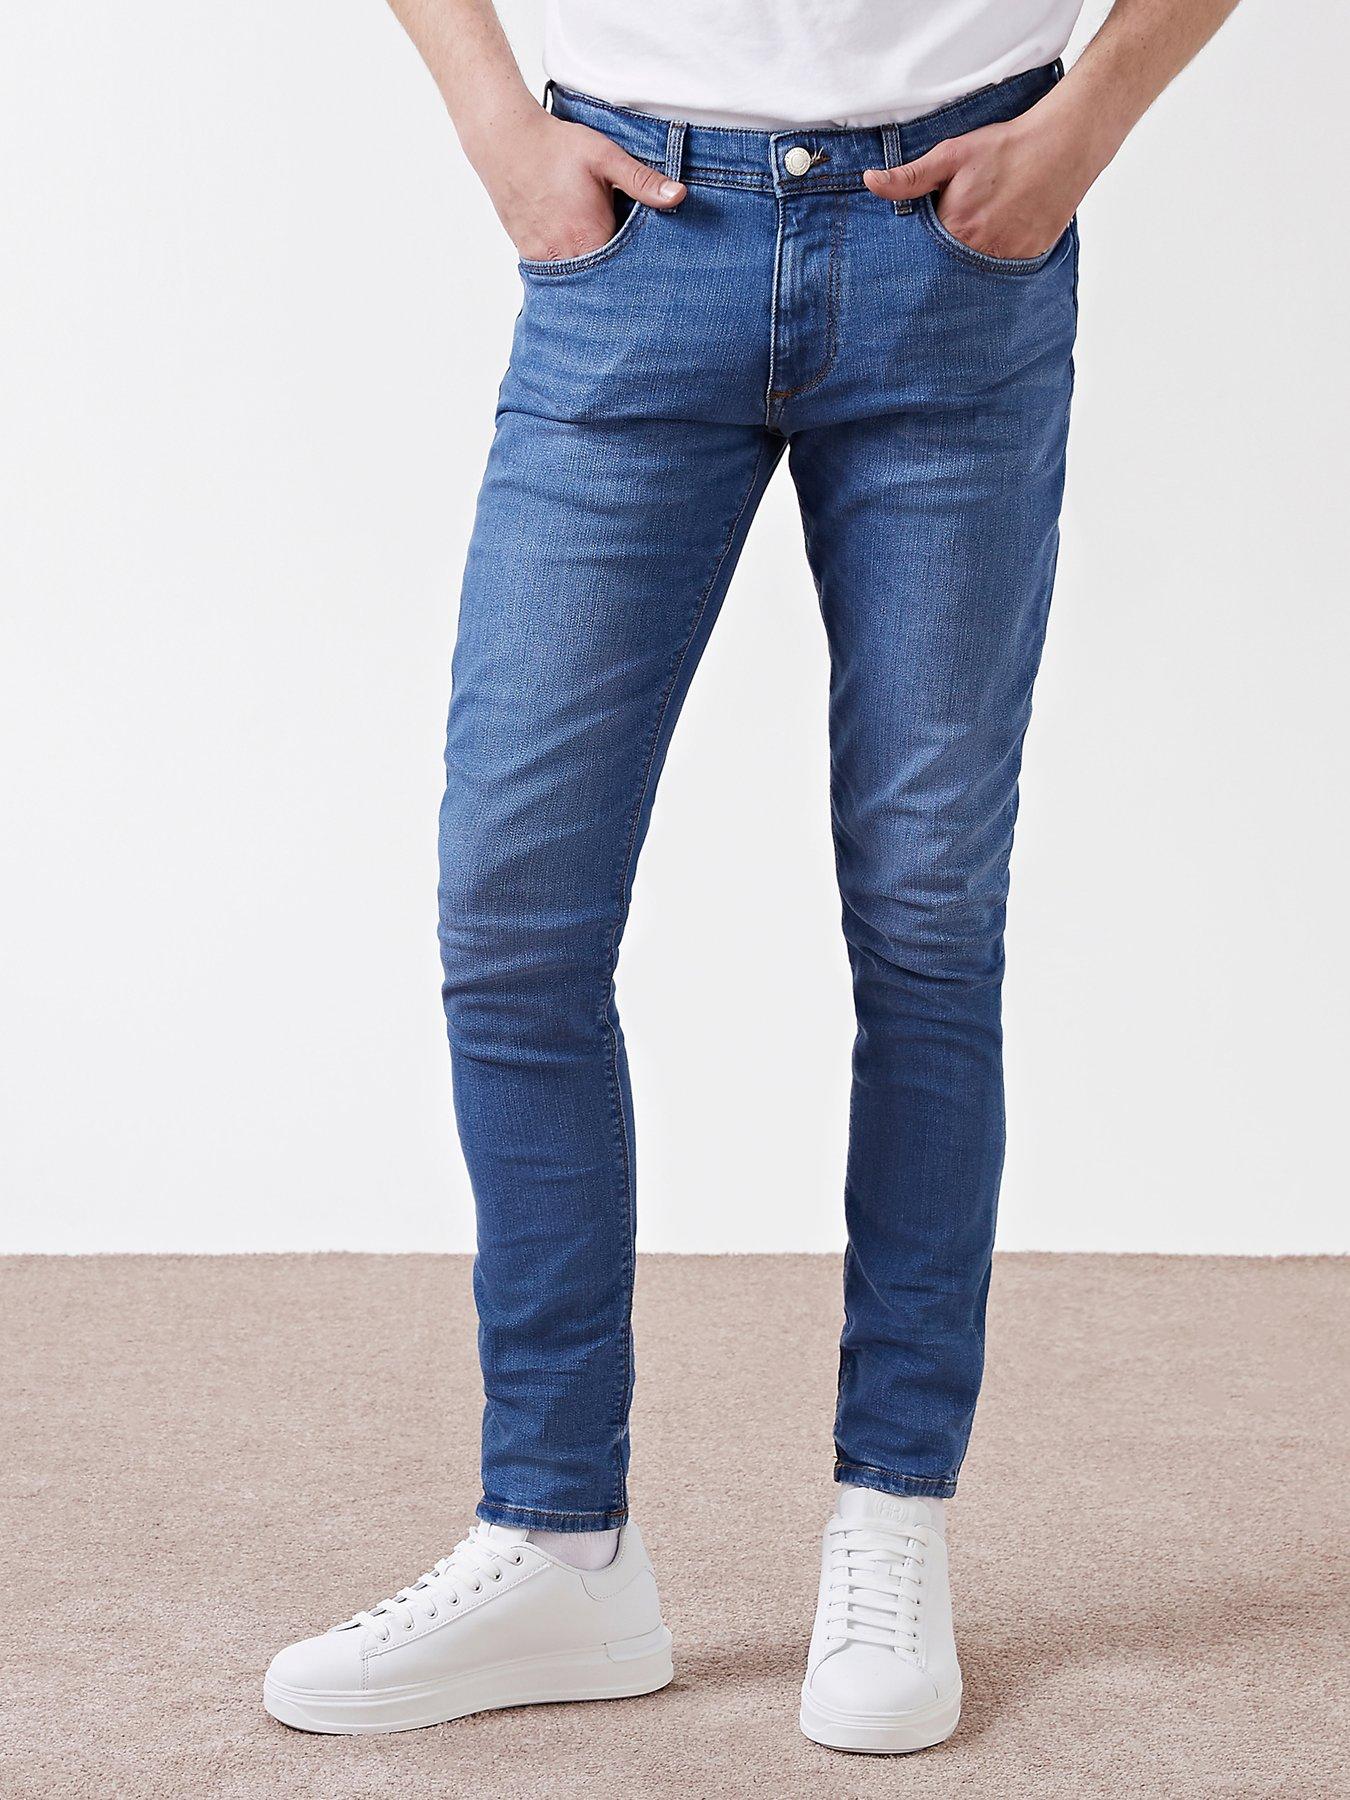 Mr Price on X: Guys find your denim fit in-store now! P.s We've